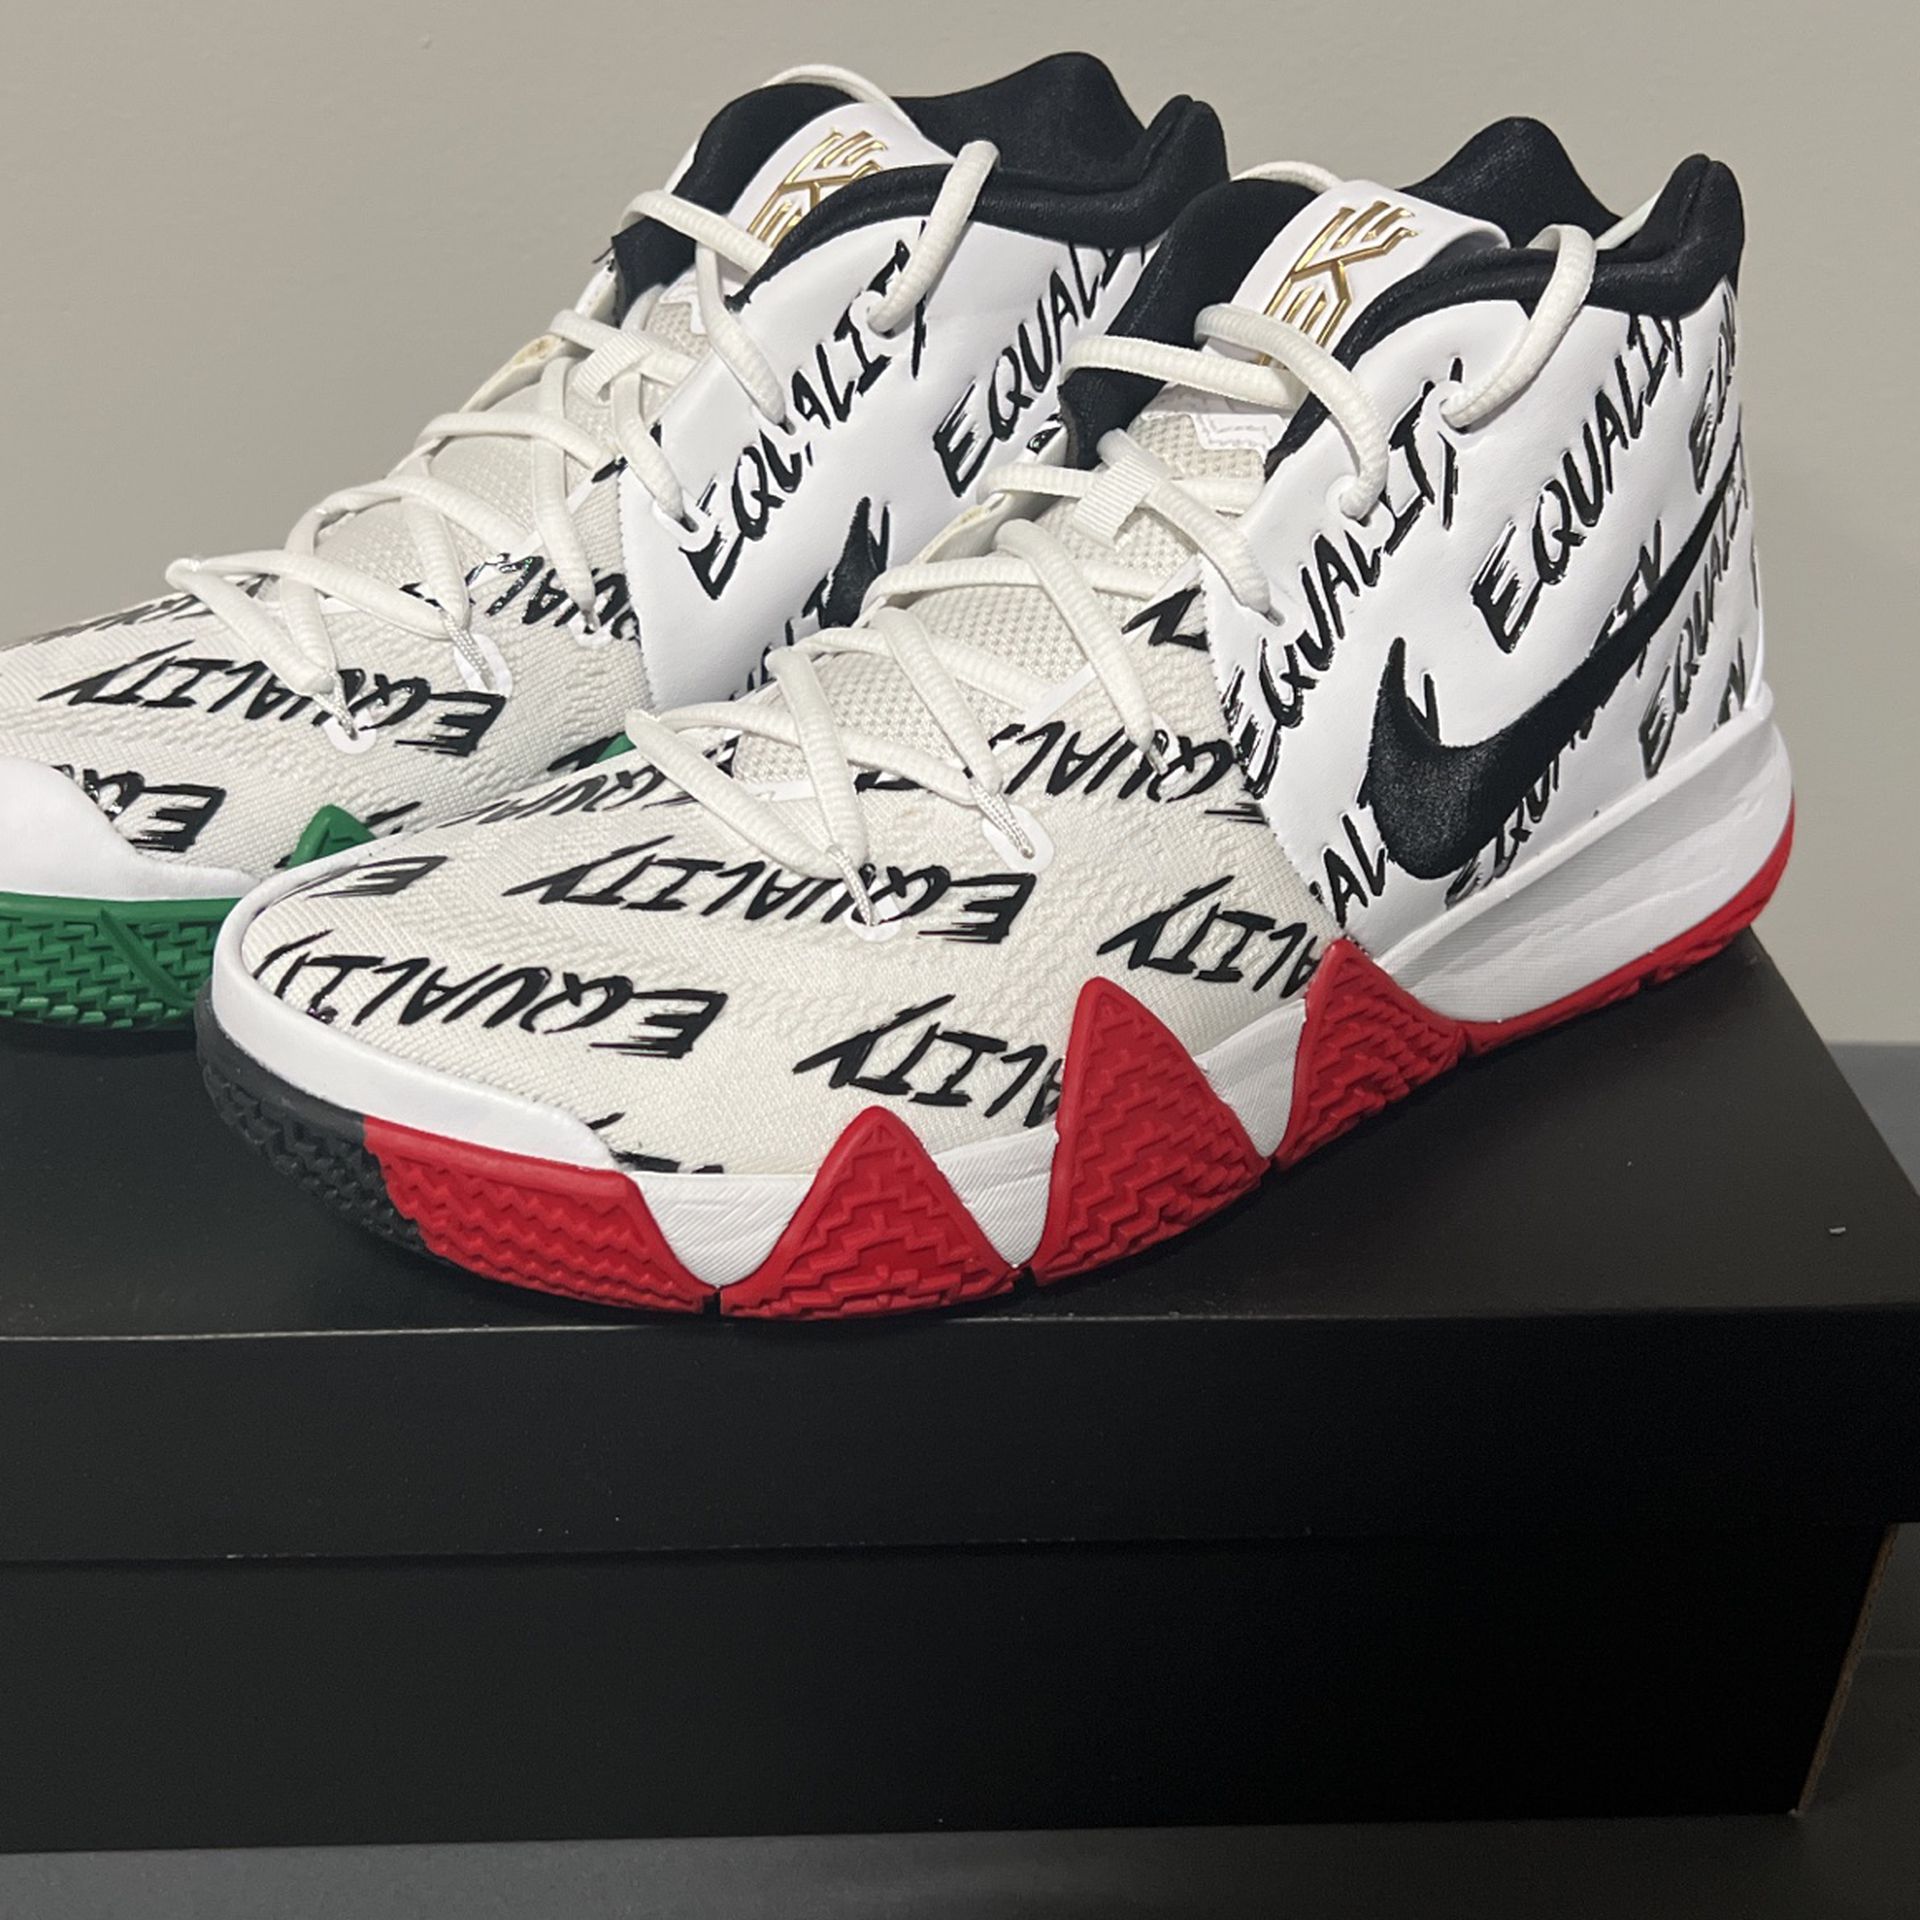 Nike Kyrie 4 Equality Black History (2018) Deadstock for Sale in Brooklyn, NY - OfferUp